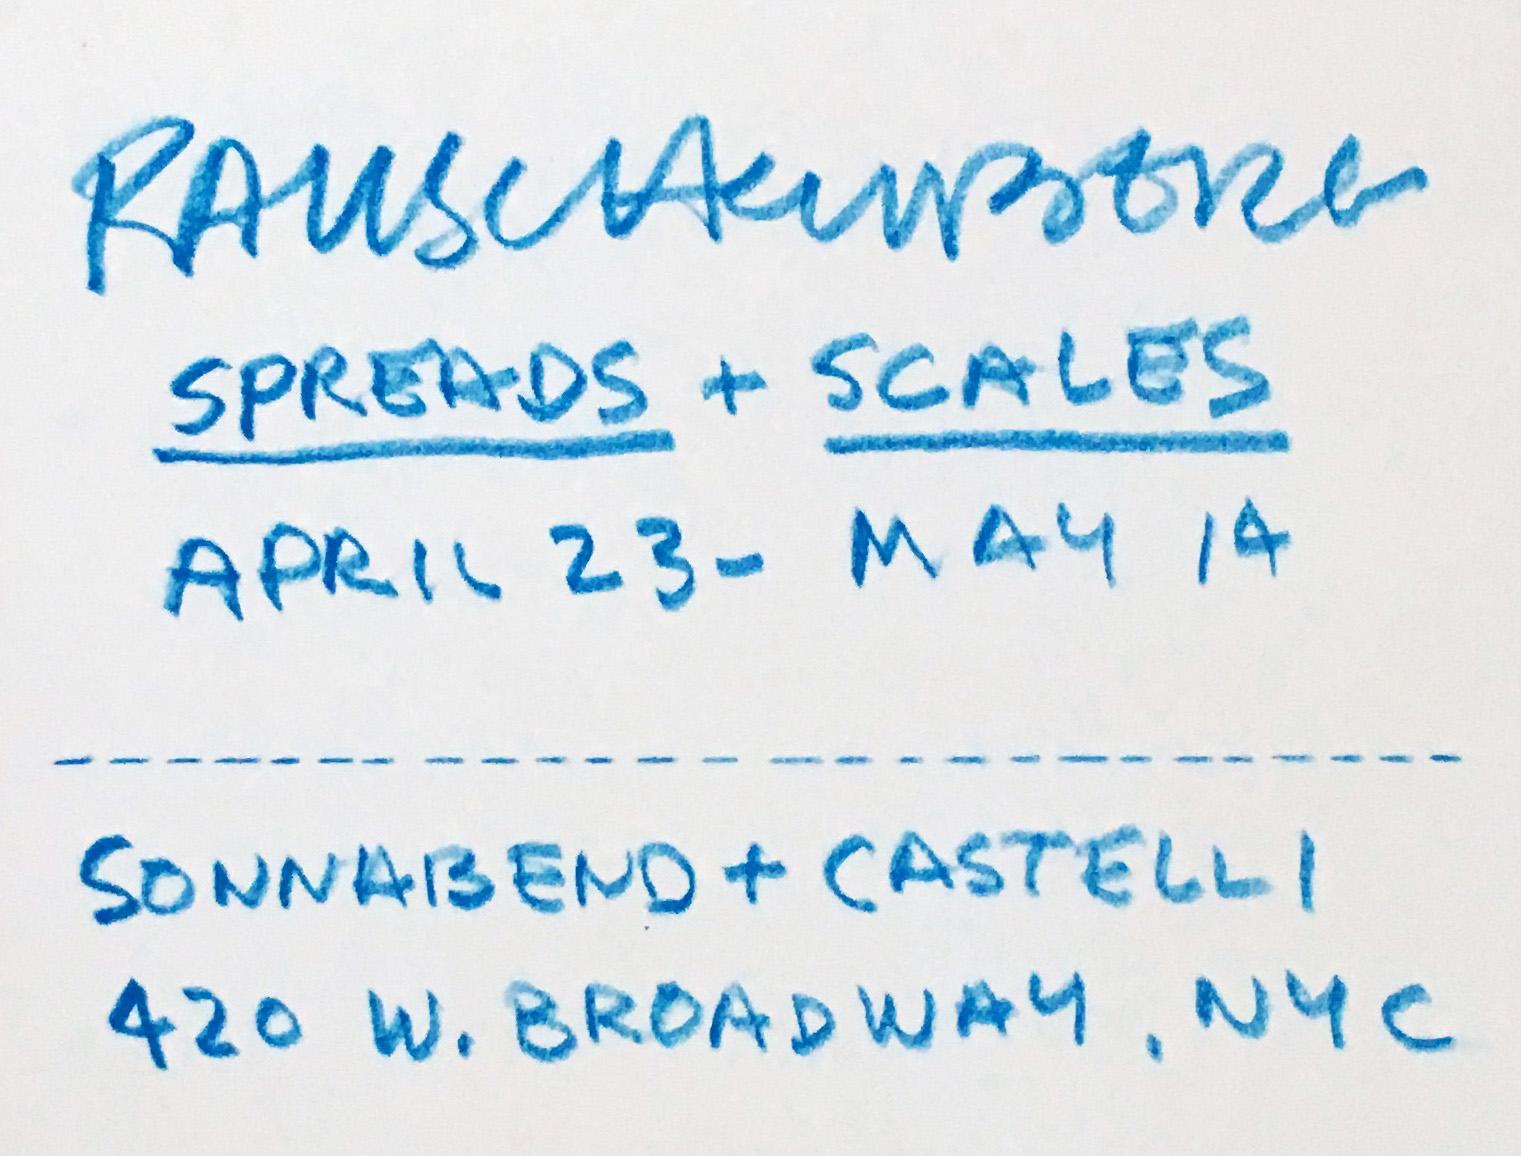 Robert Rauschenberg, Leo Castelli Gallery 1977
Vintage Robert Rauschenberg announcement card designed by the artist in conjunction with the exhibition: Robert Rauschenberg: Spreads and Scales: April 23–May 23, Leo Castelli and Sonnabend Gallery, New